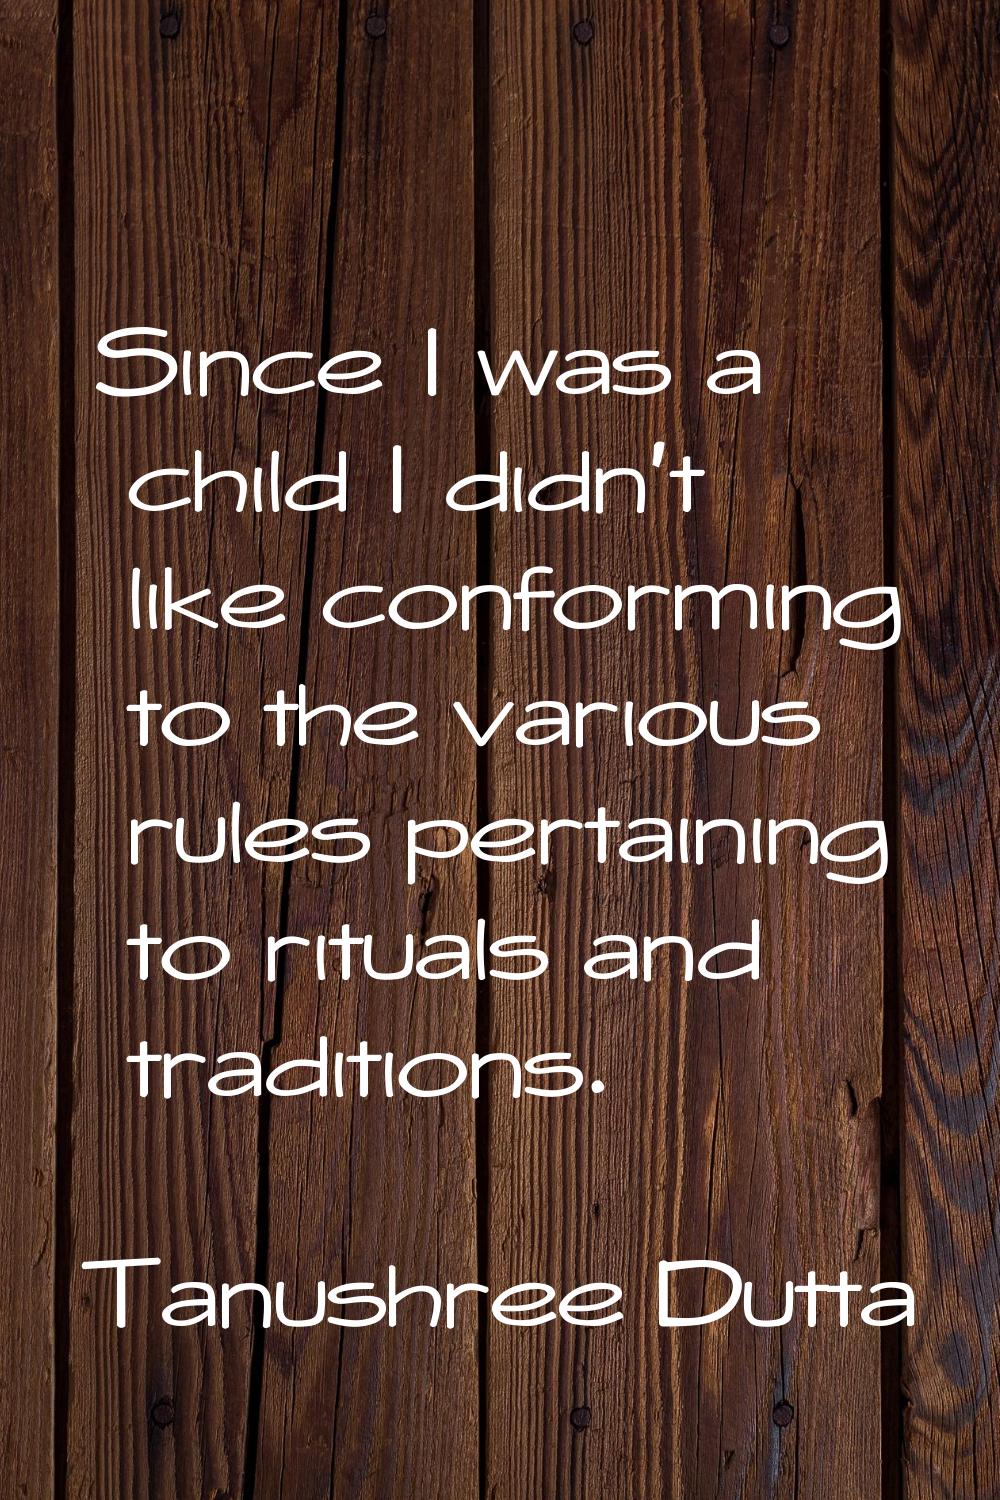 Since I was a child I didn't like conforming to the various rules pertaining to rituals and traditi